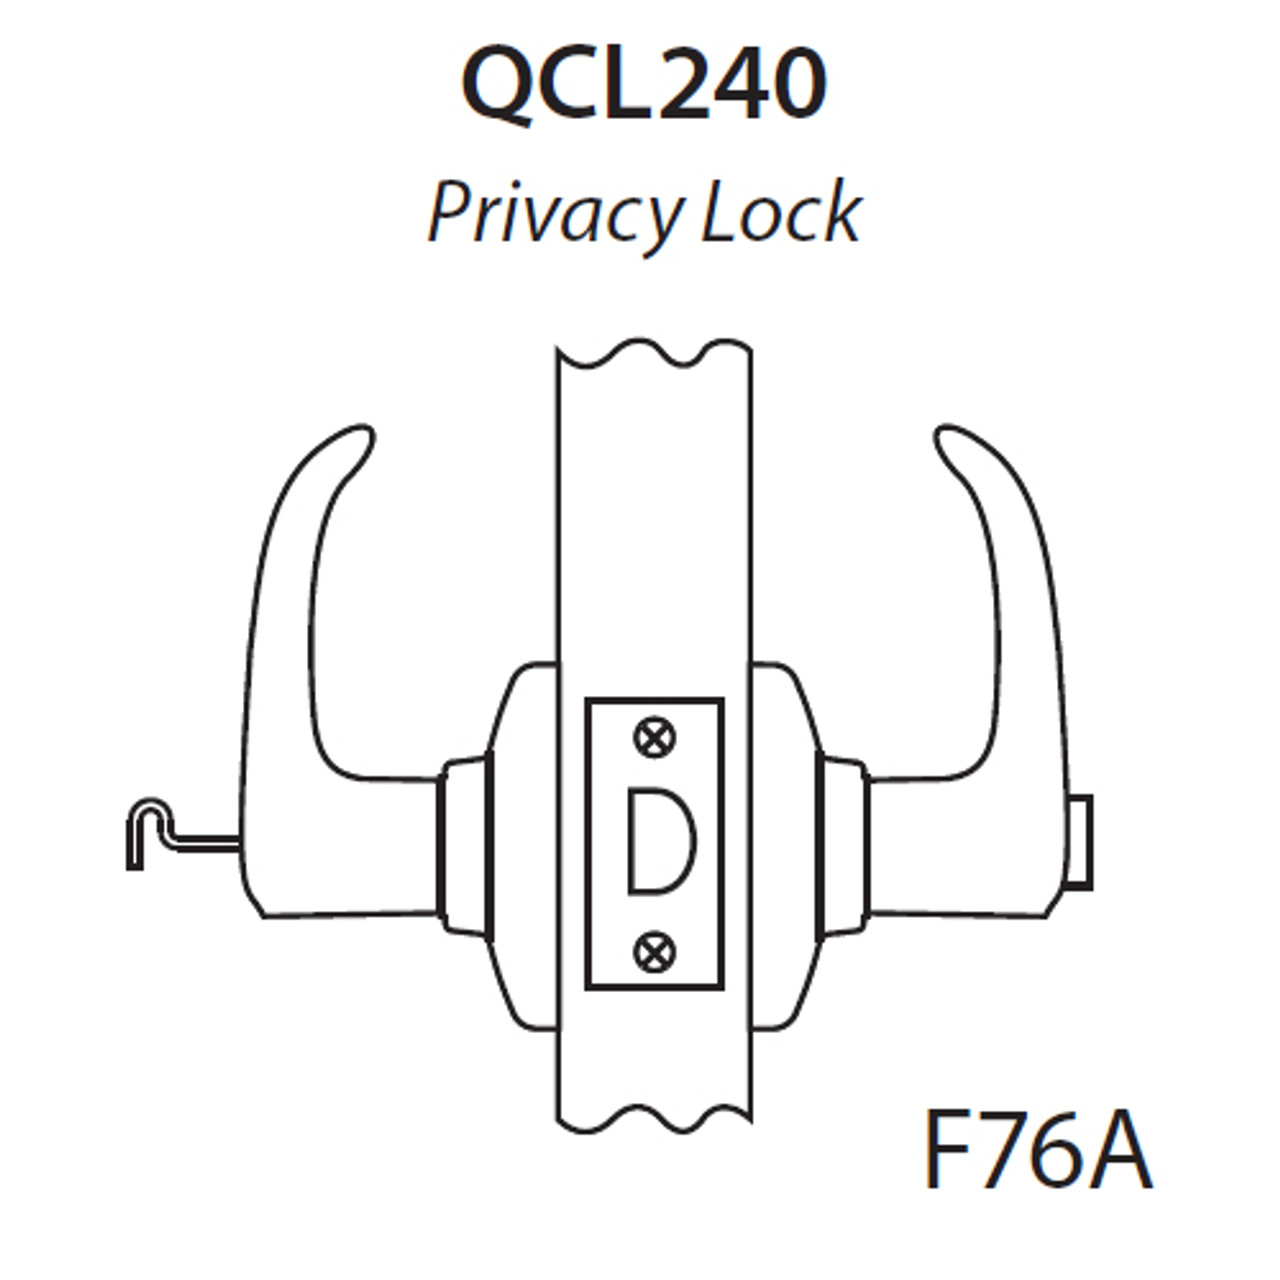 QCL240E613NR4FLS Stanley QCL200 Series Cylindrical Privacy Lock with Sierra Lever in Oil Rubbed Bronze